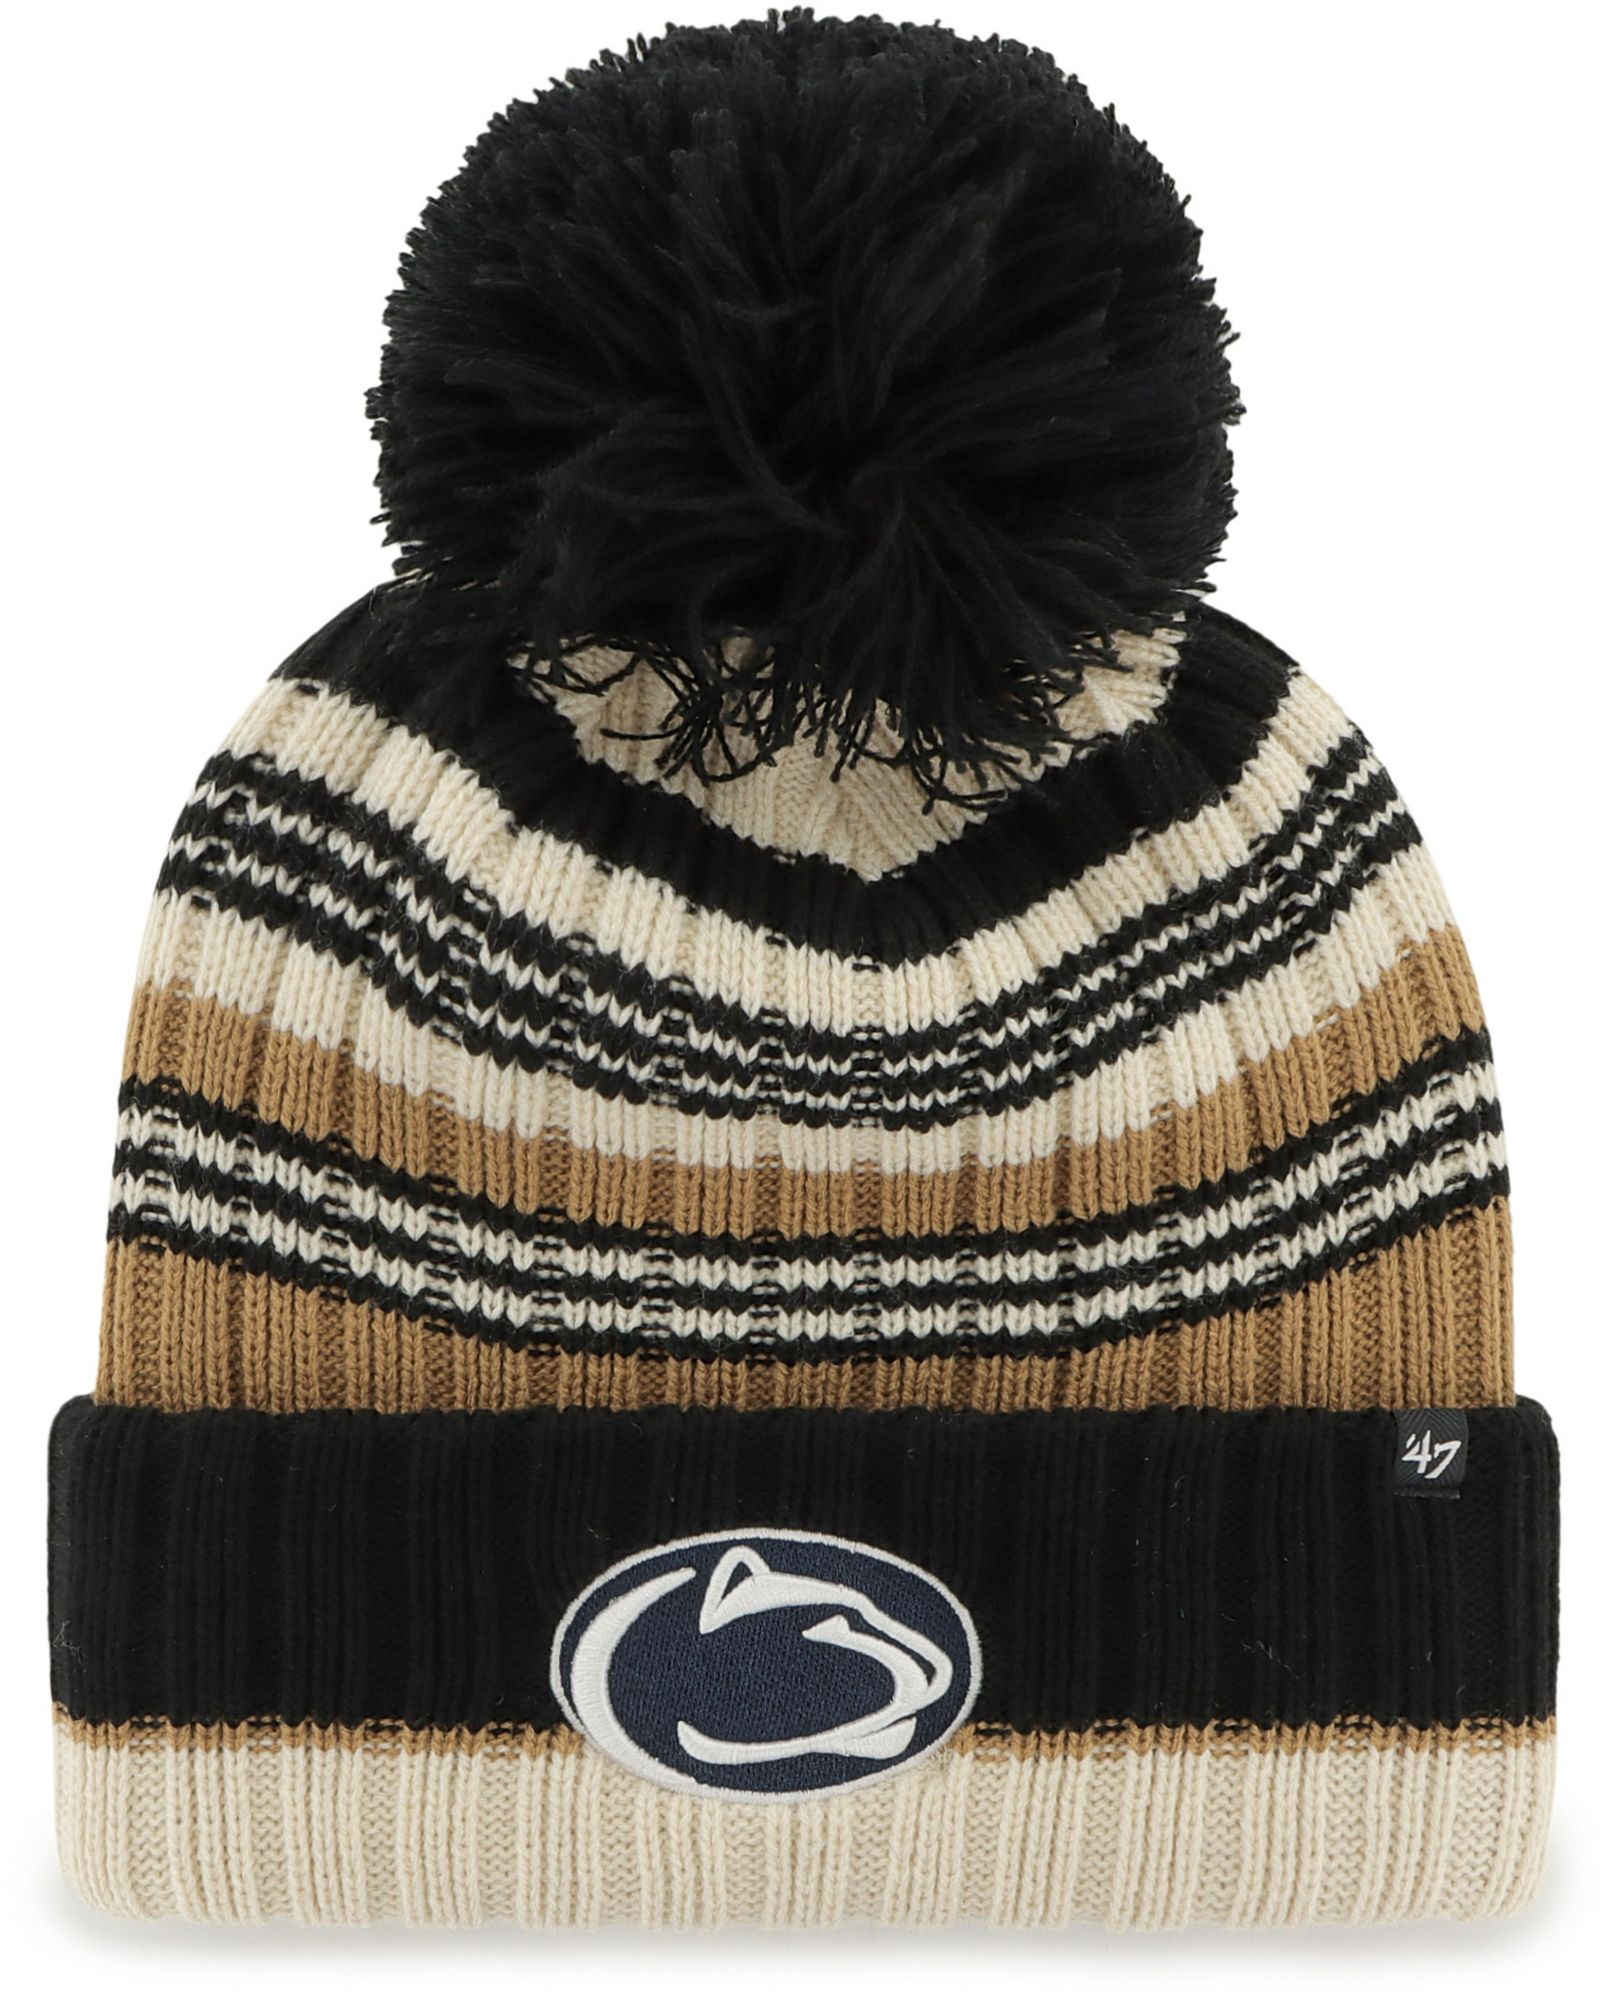 ‘47 Women's Penn State Nittany Lions Natural Barista Knit Beanie, Tan